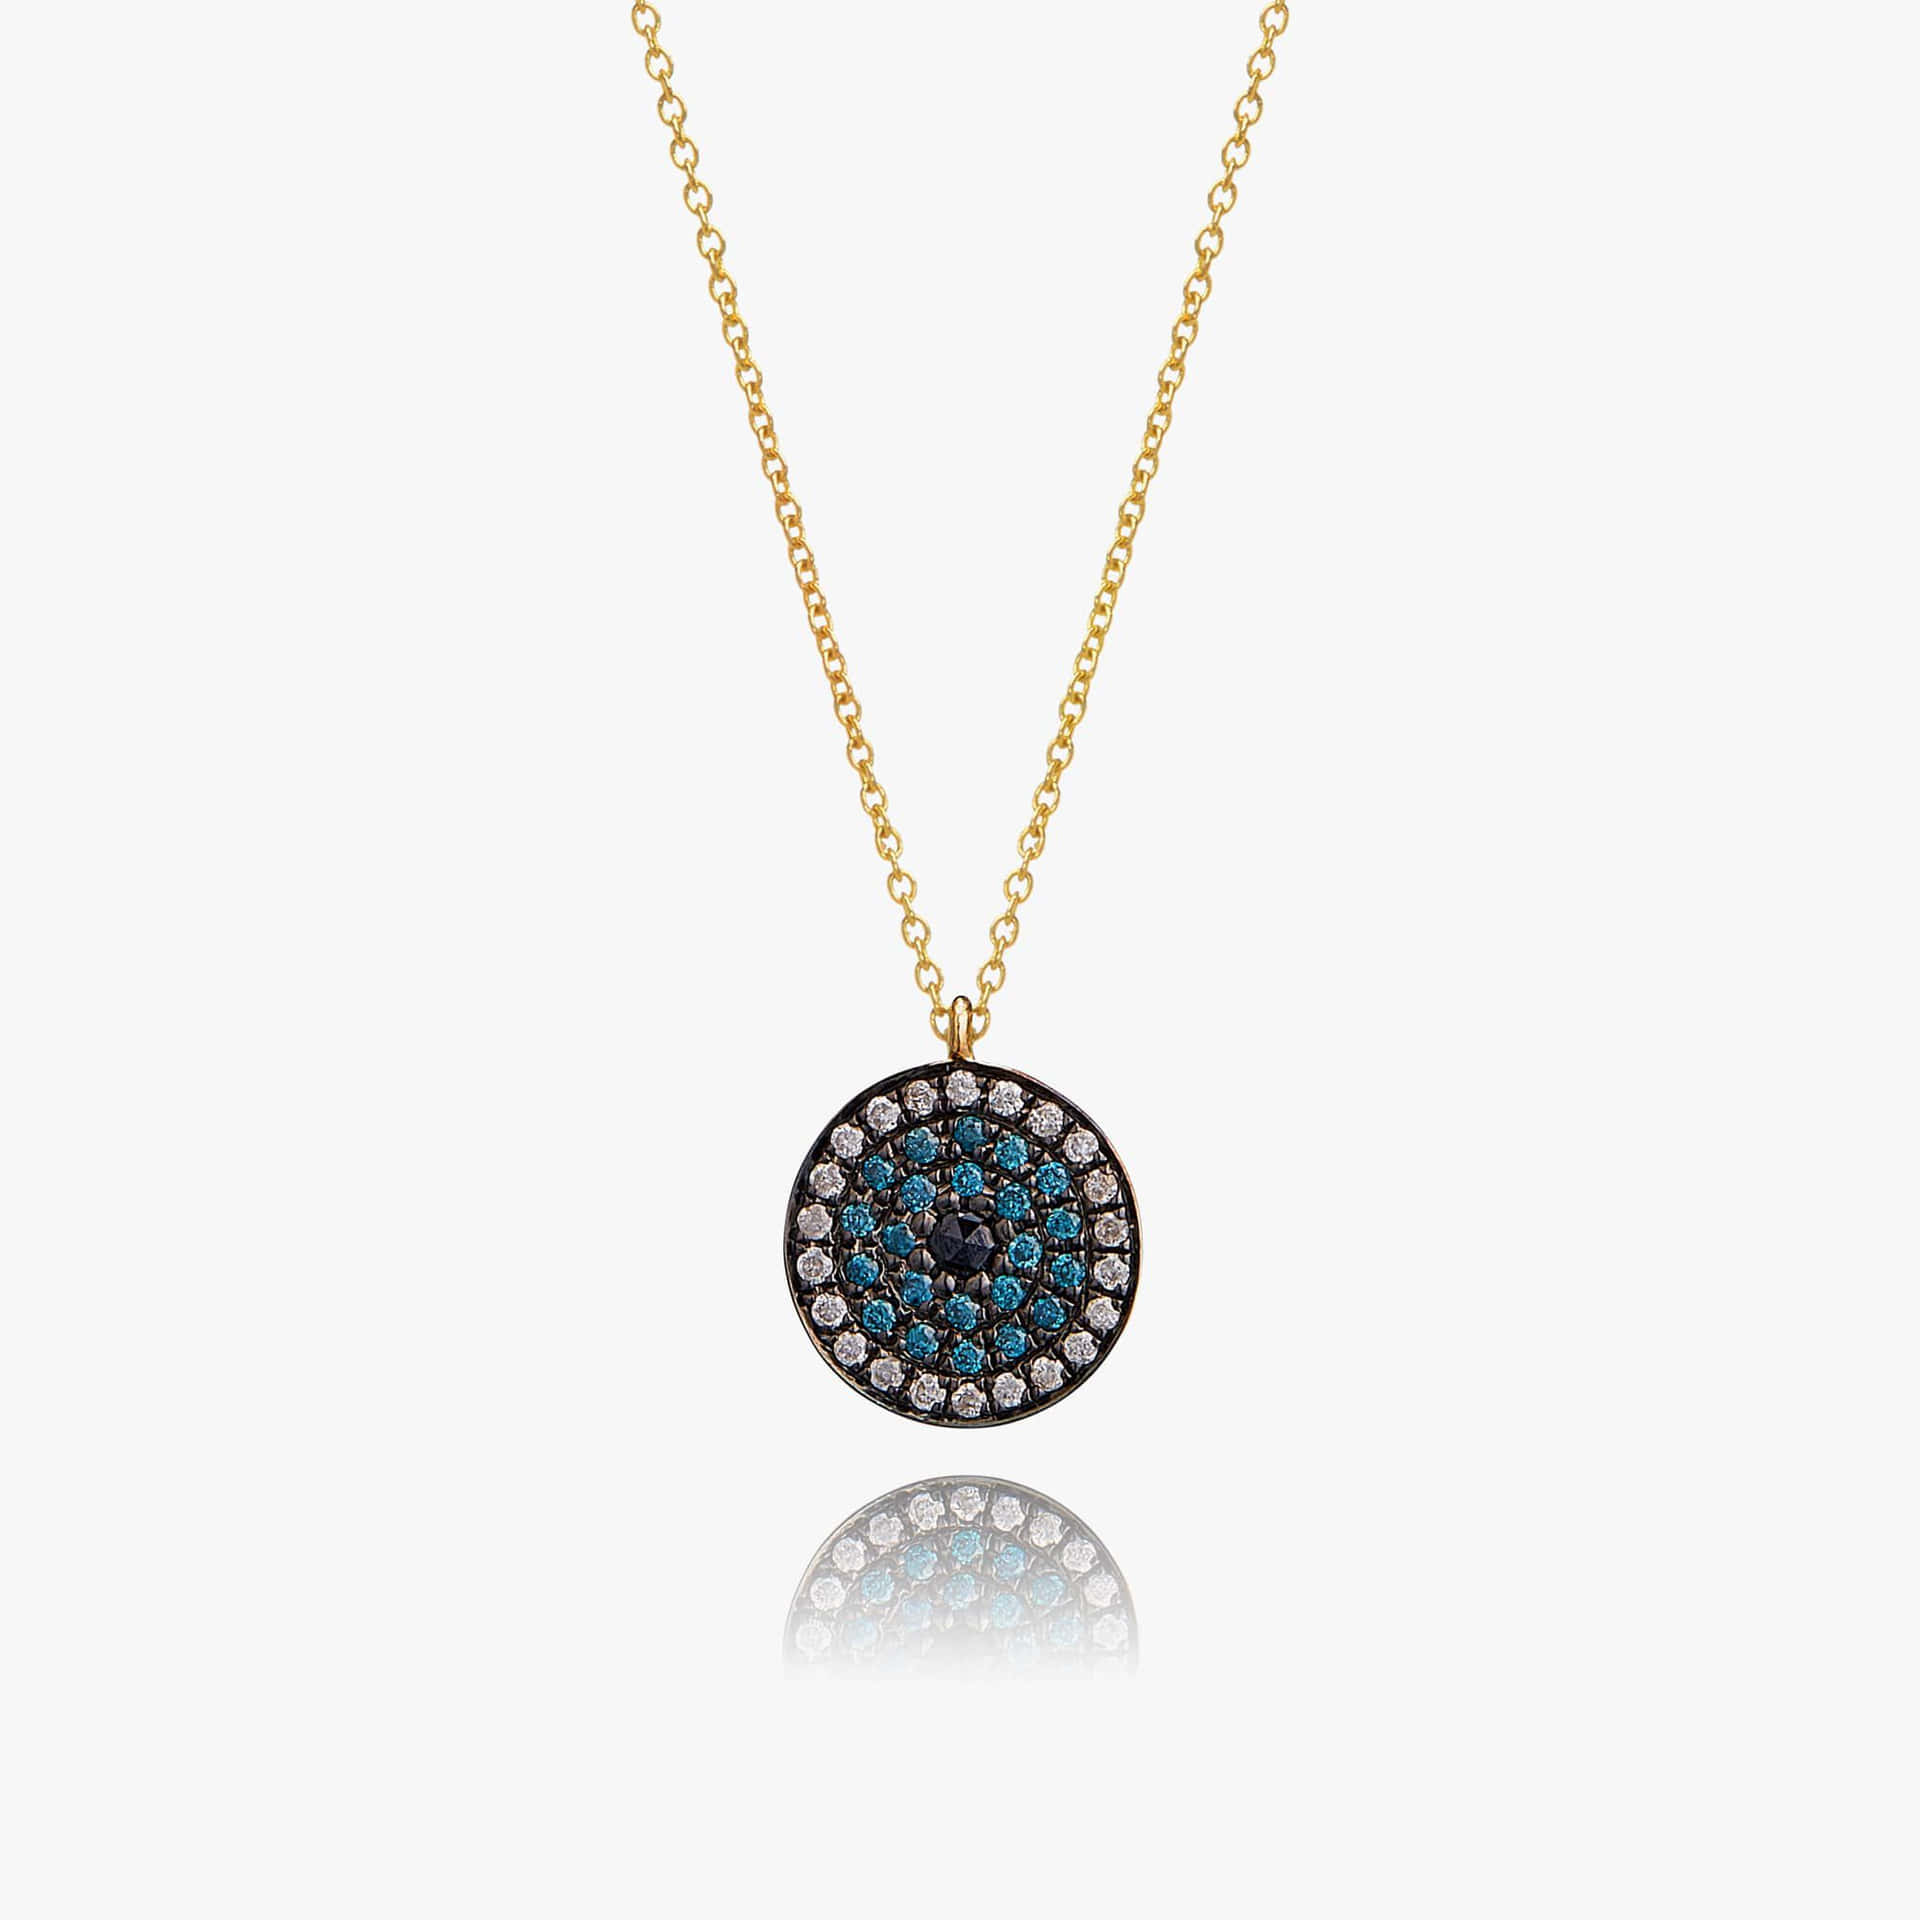 Protect yourself from the Evil Eye with this symbol of luck